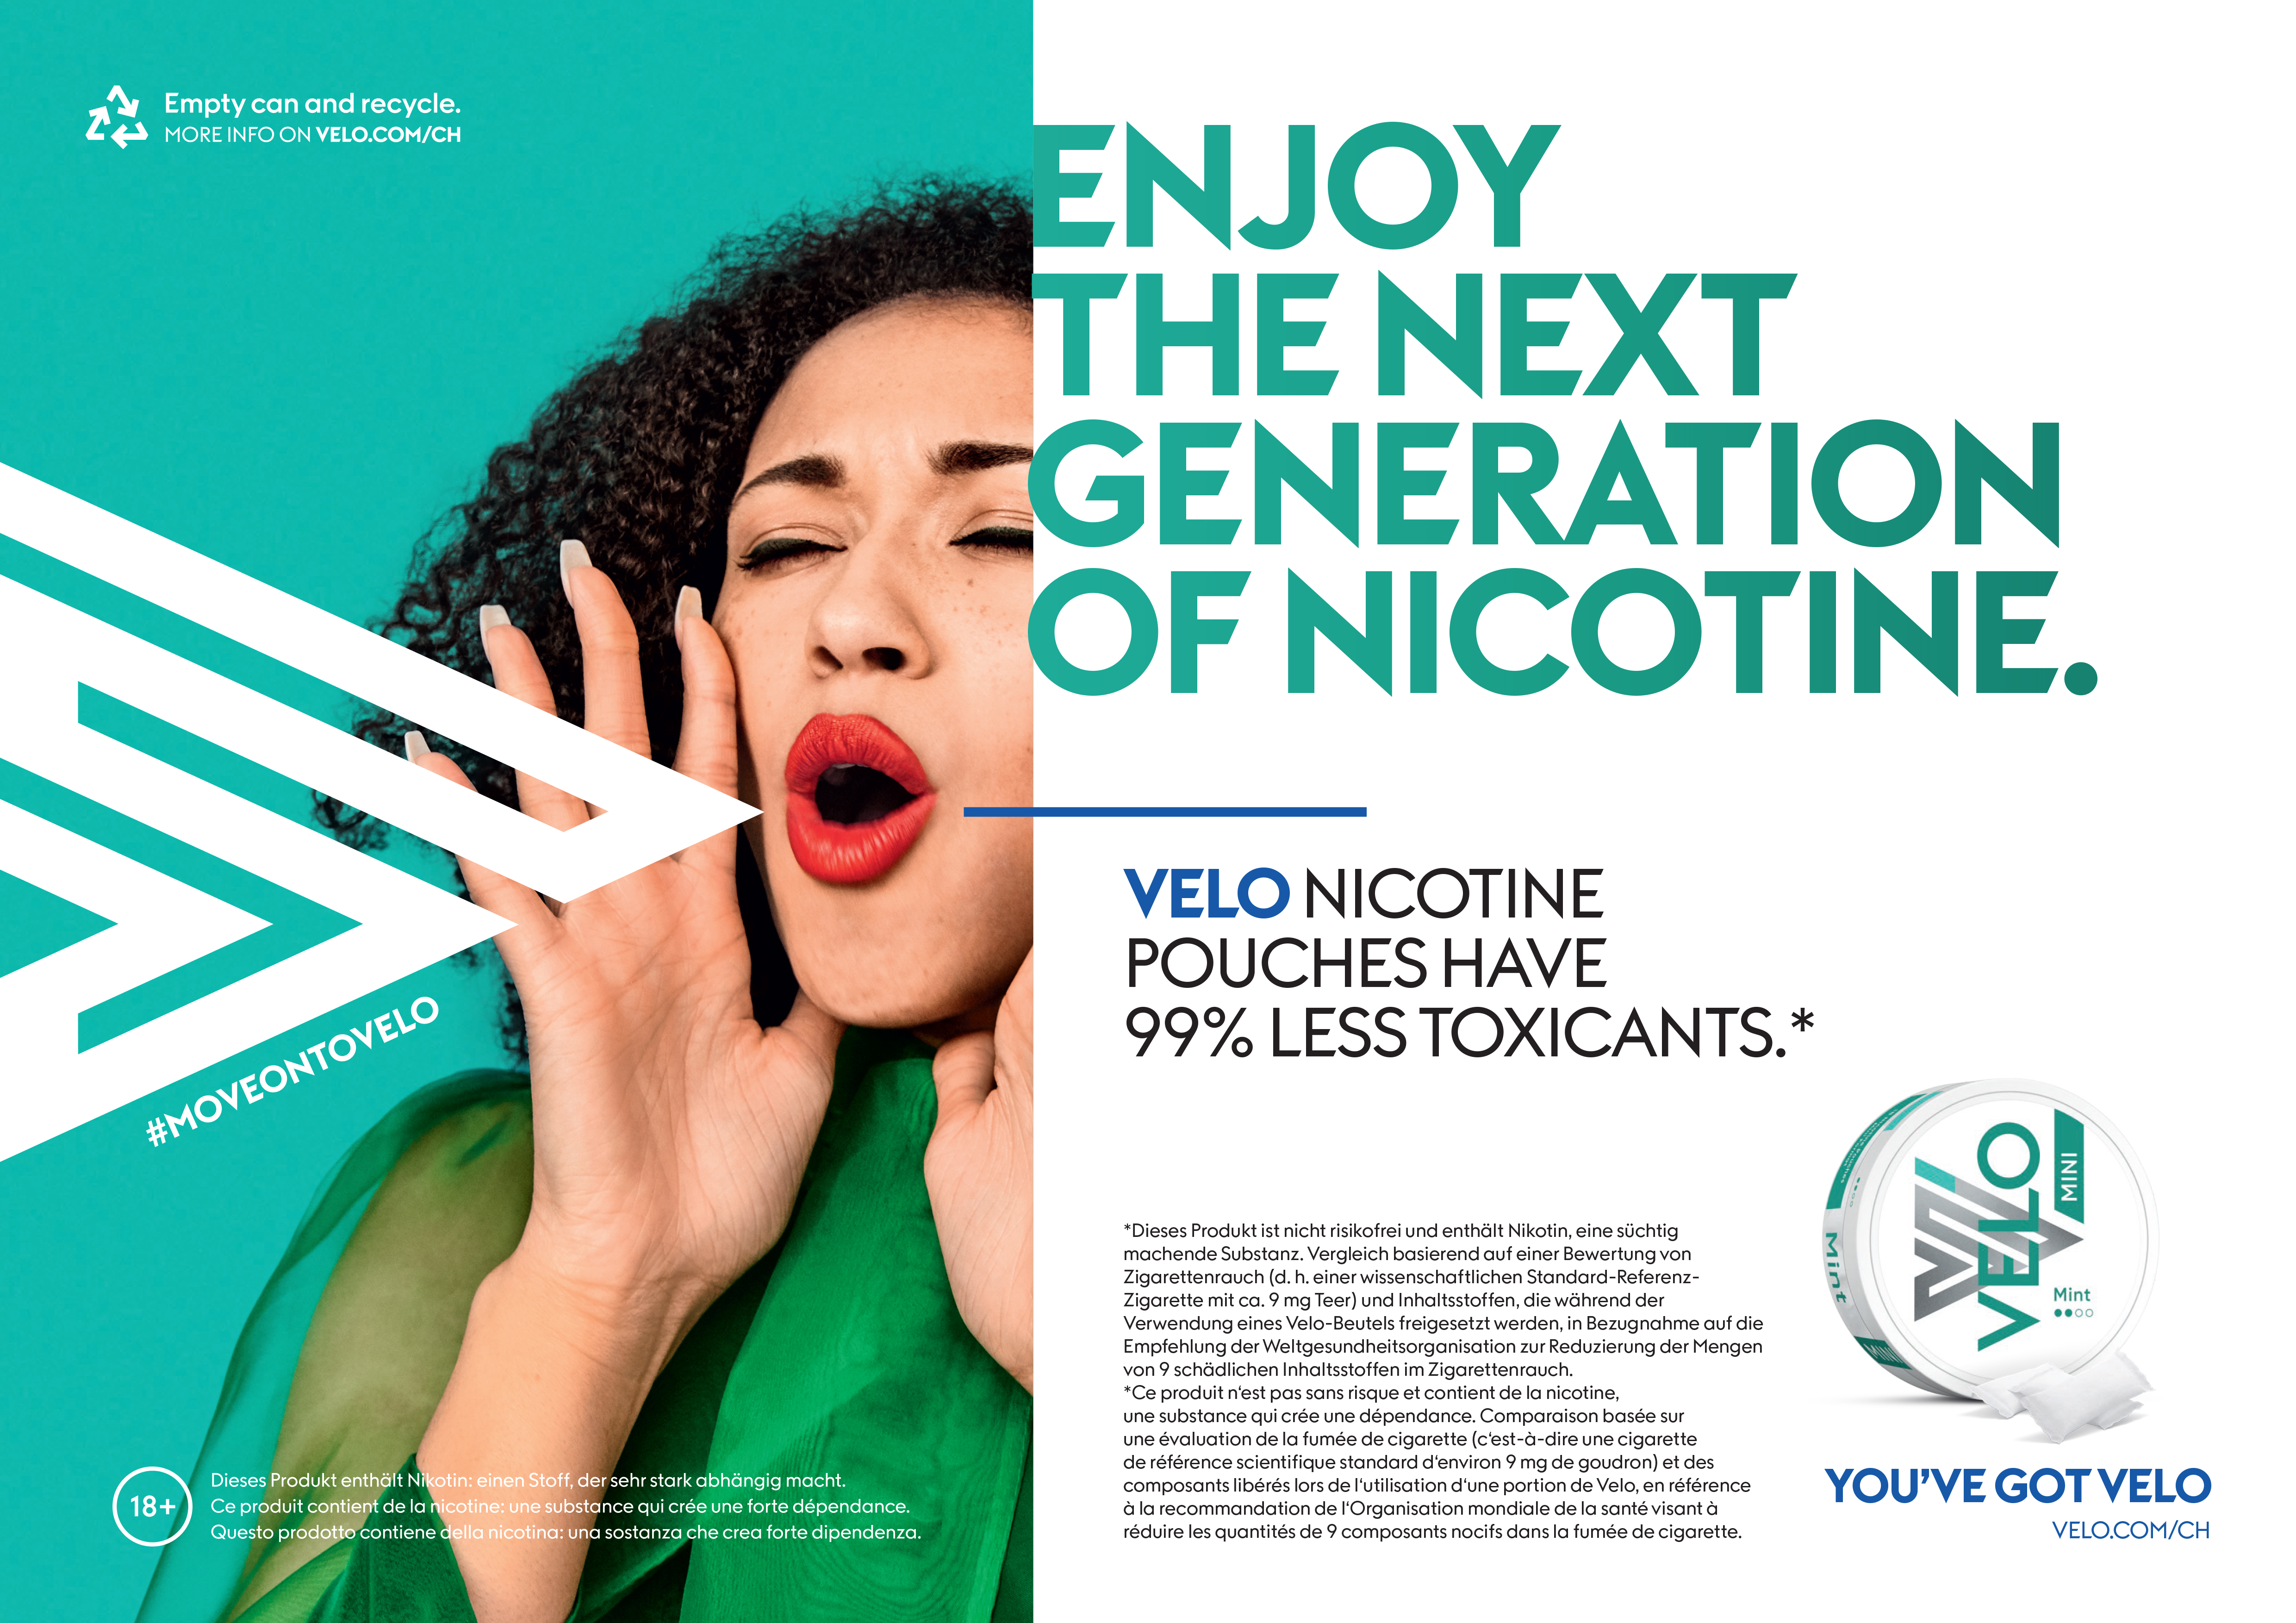 Velo nicotine pouches have 99% less toxicants